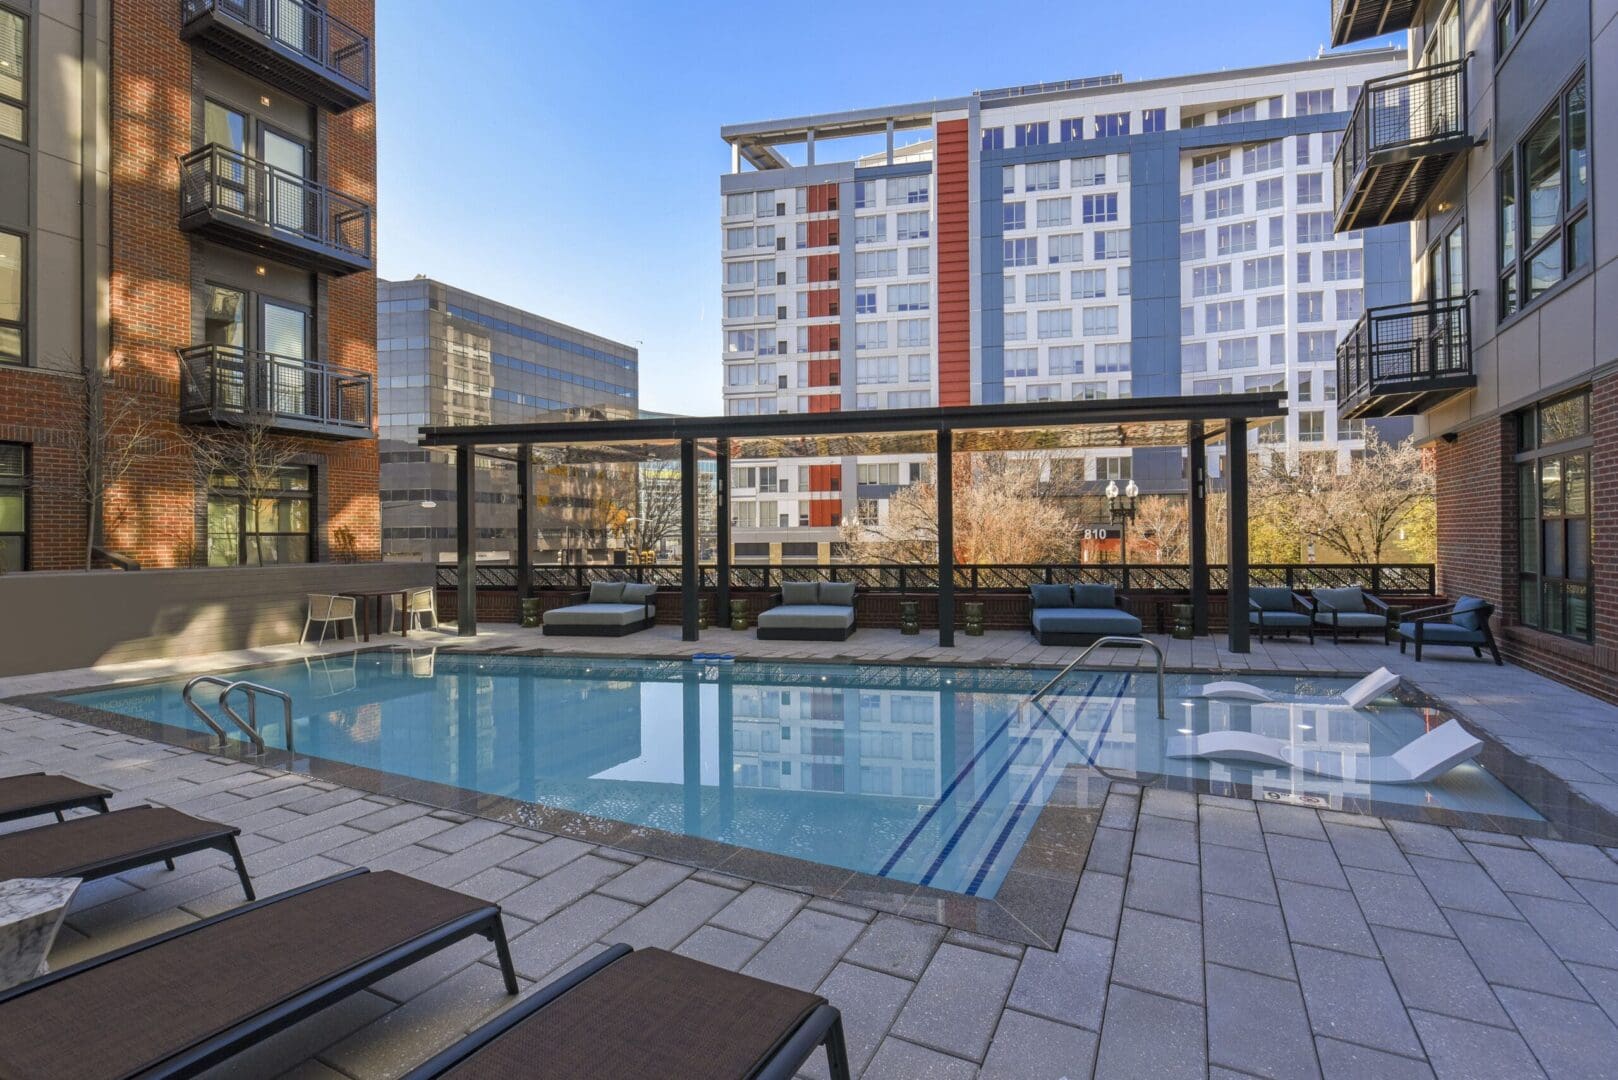 DC apartments for rent with a resort-style swimming pool and private cabanas